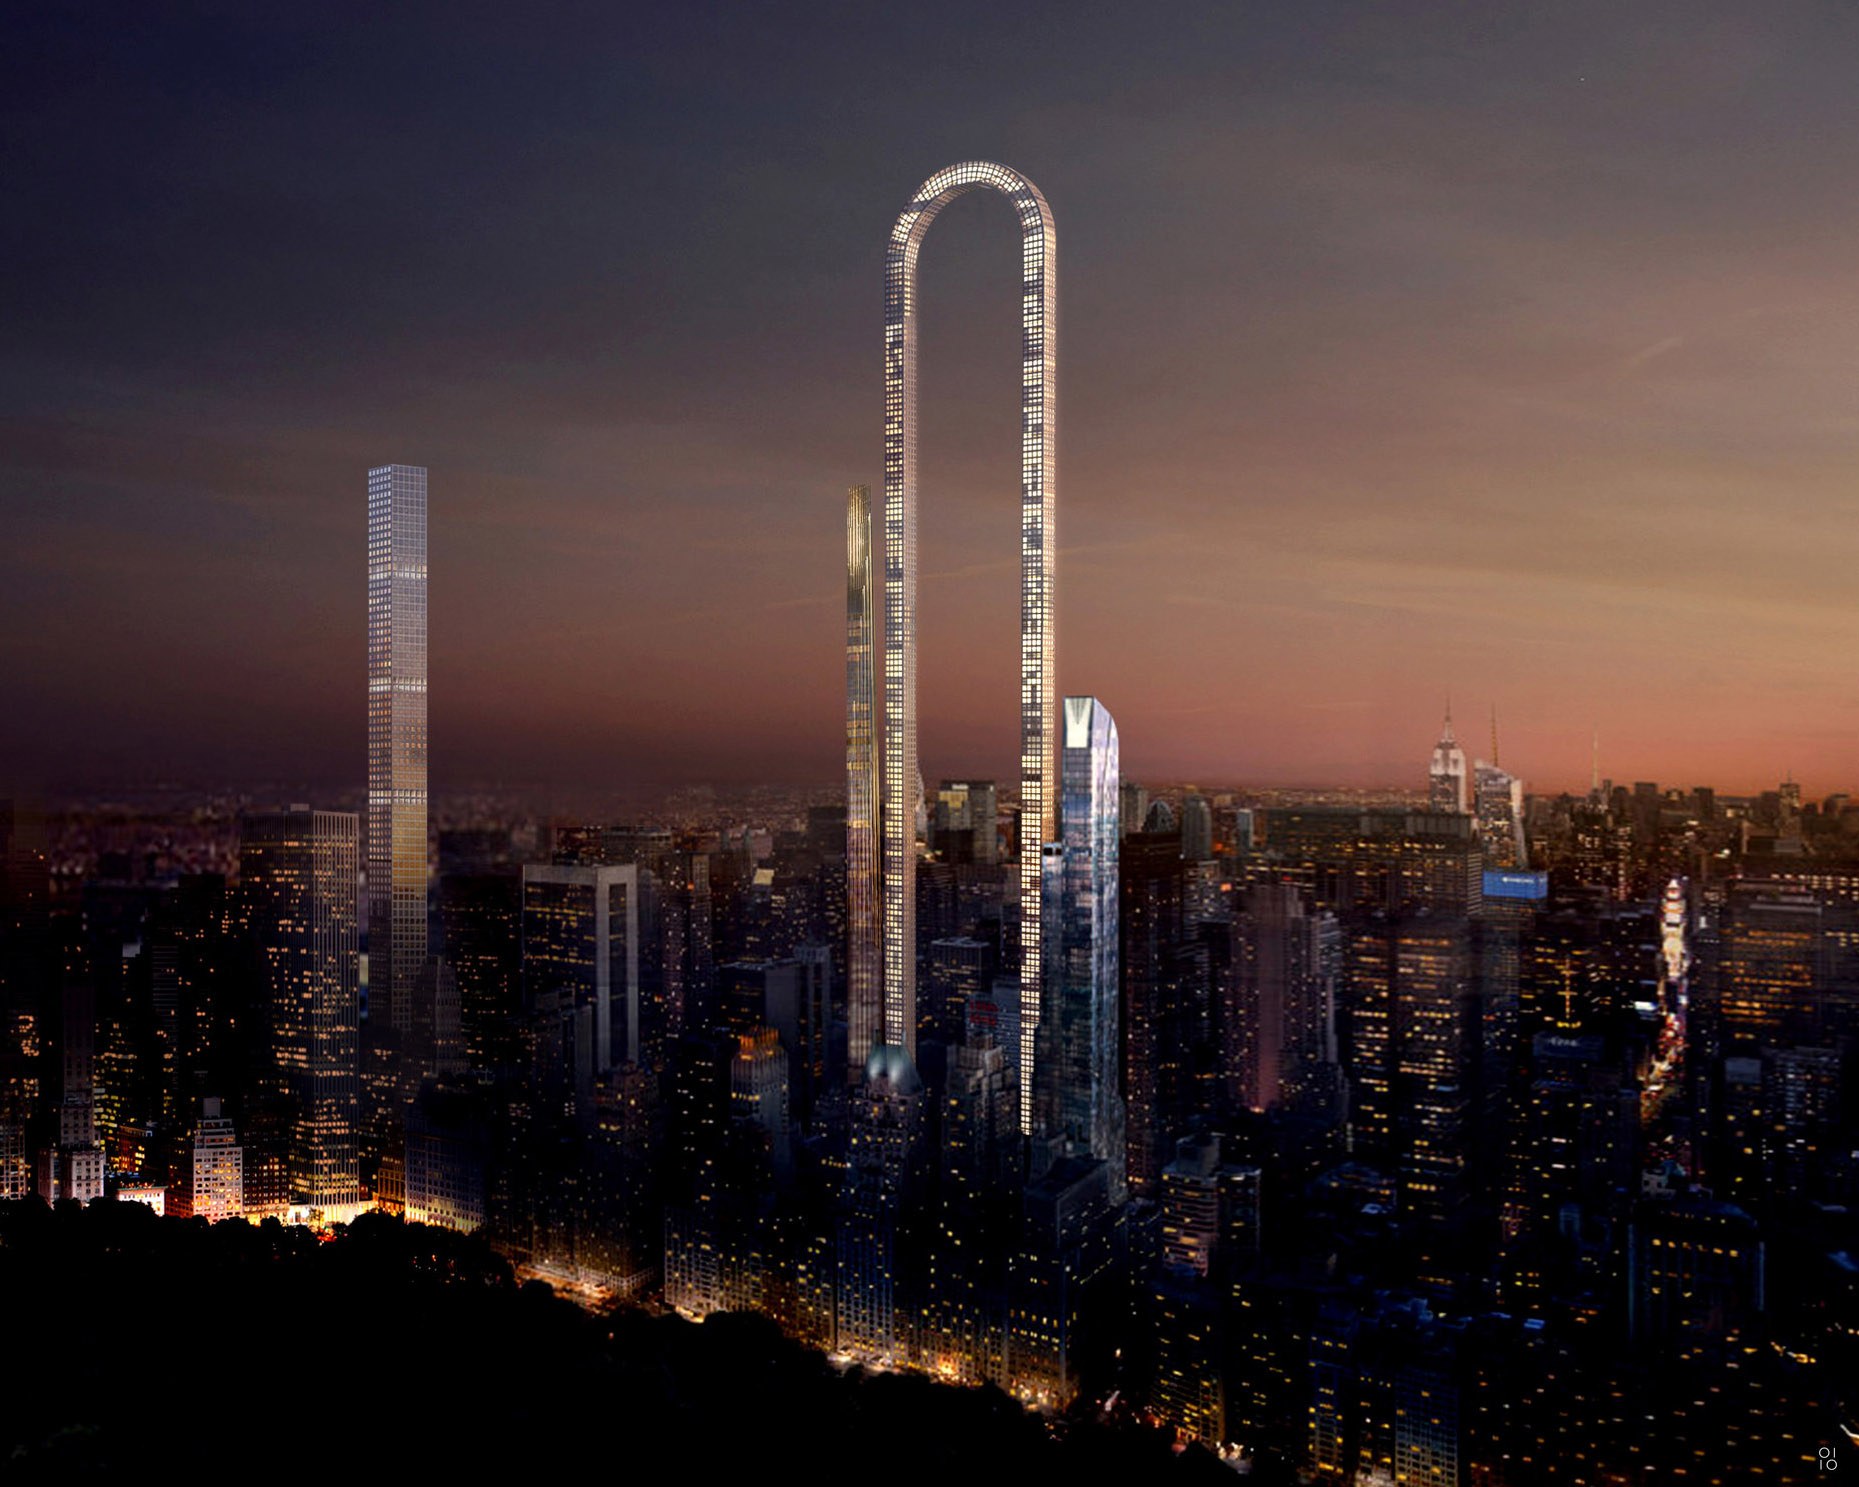 This skyscraper could ruin New York's skyline - AOL Lifestyle